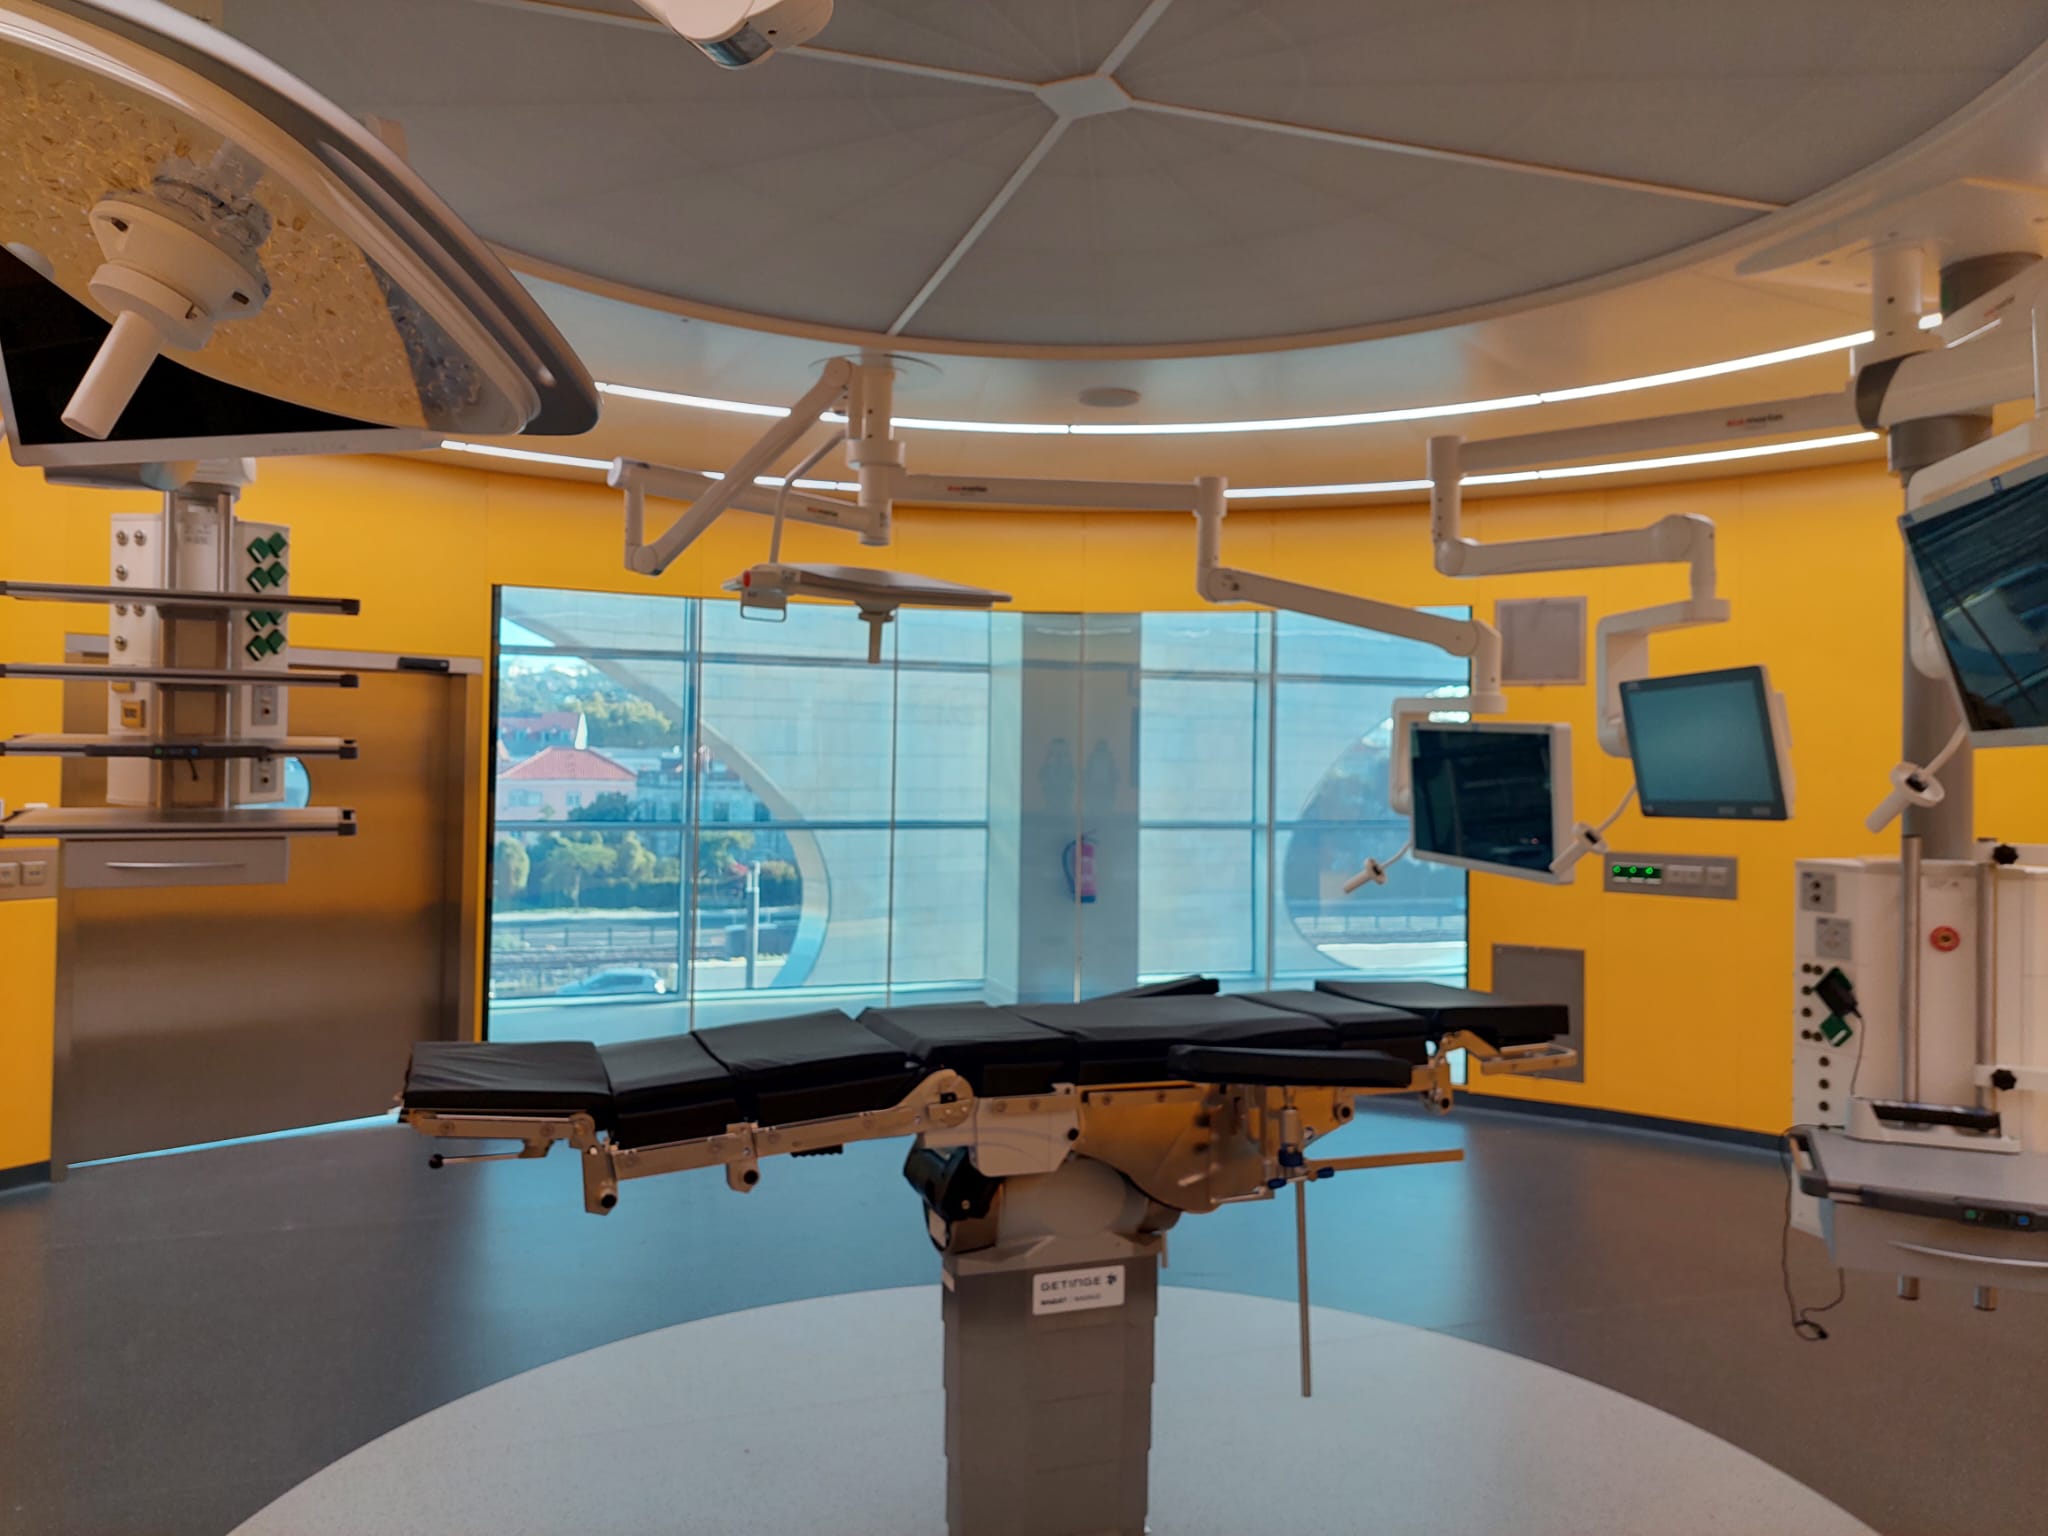 Blackout Smart Glass designs help to improve the overall hygiene and usability of this surgery theatre based in Portugal. The various glass states allow differing levels of natural light into the space, and privacy on demand.